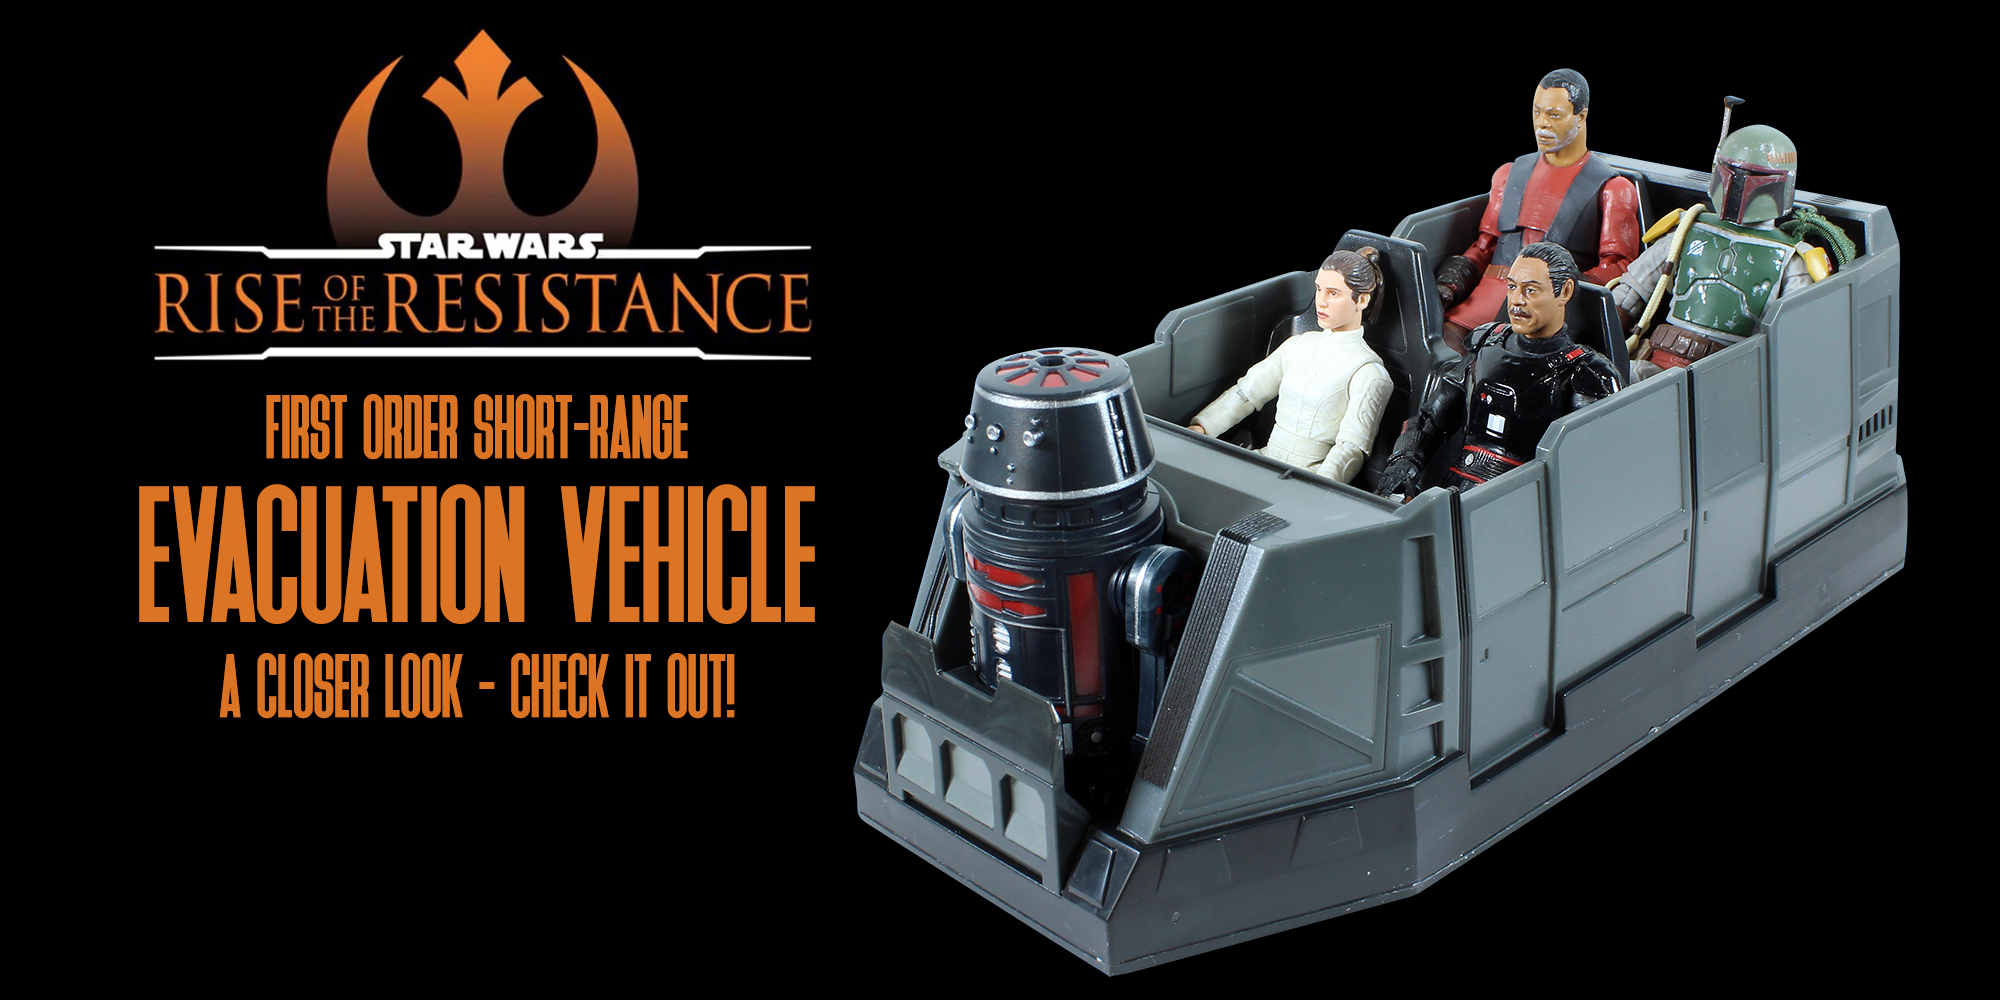 A Closer Look At The First Order Short-Range Evacuation Vehicle